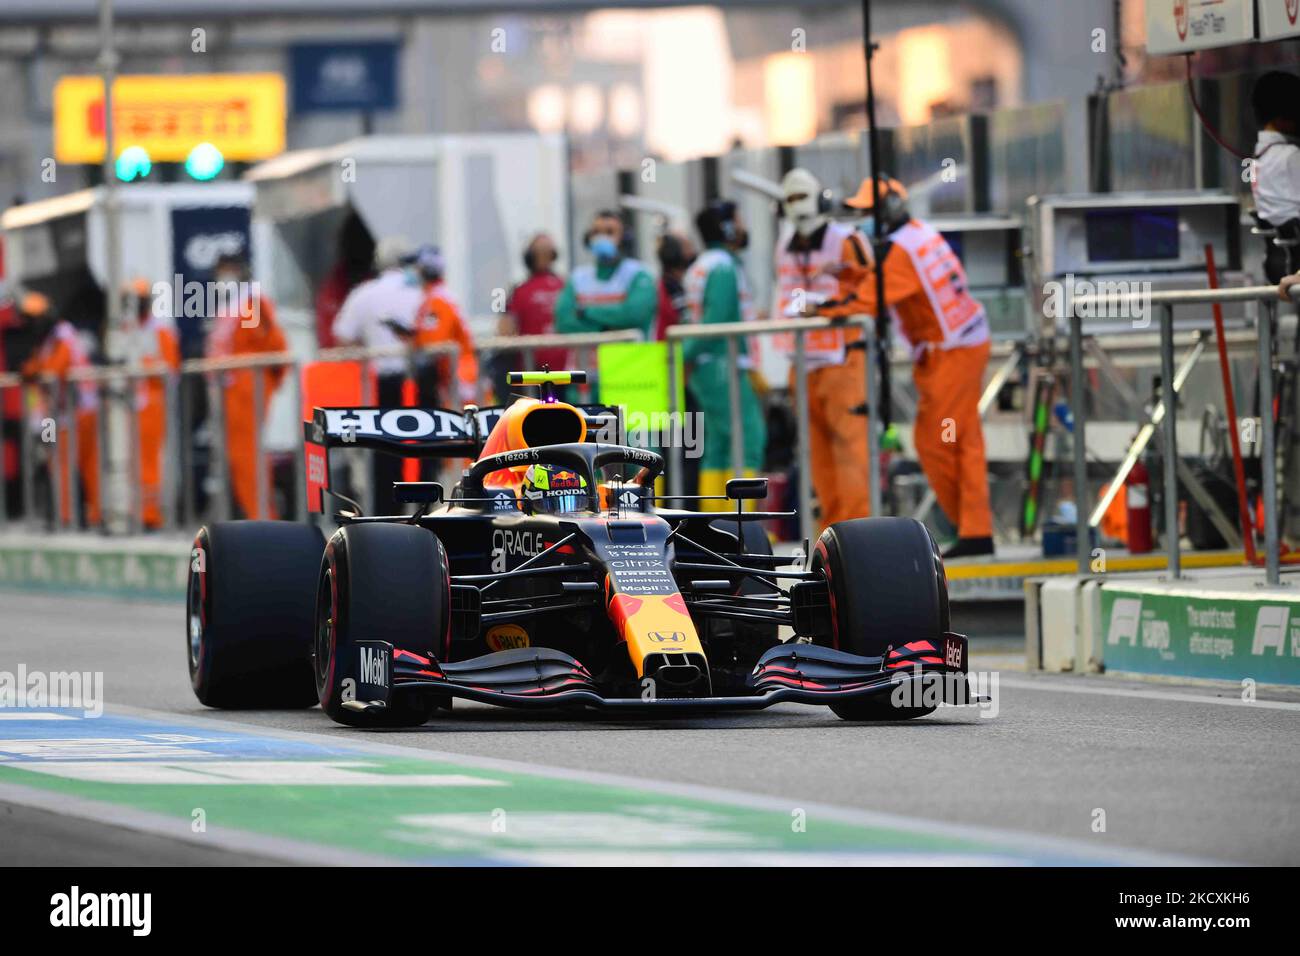 Sergio Perez of Red Bull Racing Honda drive his RB16B single-seater during qualifying session of last race of the year in Yes Marina Circuit, Yes Island, Abu Dhabi, Uniter Arab Emirates, 11 December 2021 (Photo by Andrea Diodato/NurPhoto) Stock Photo